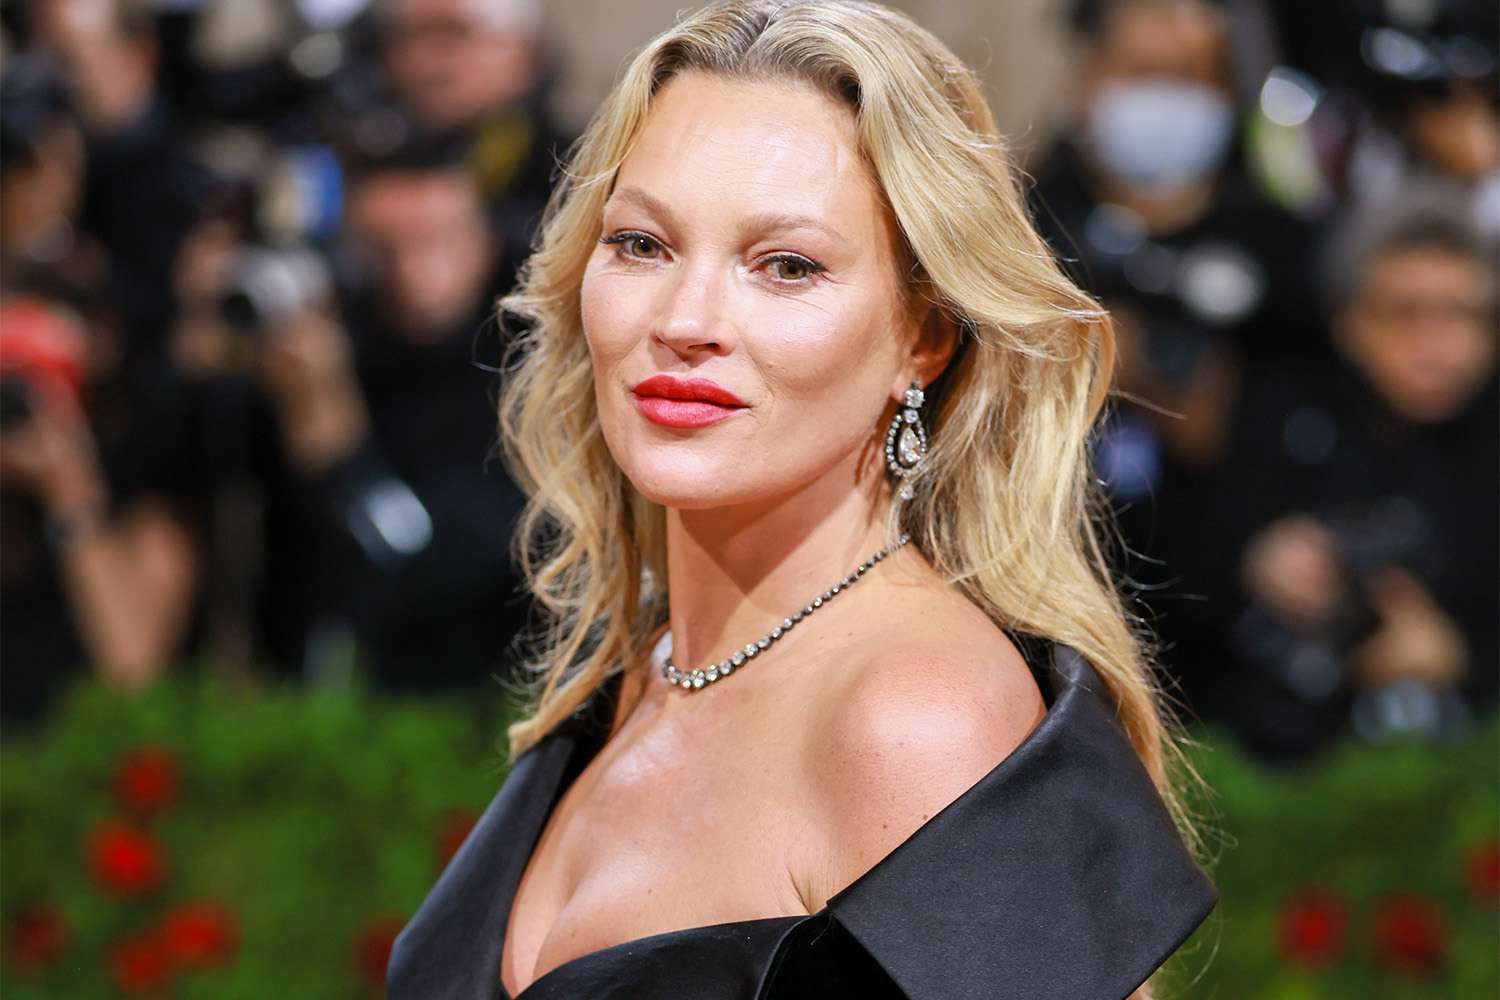 Kate Moss Says She Felt ‘Vulnerable and Scared’ on Topless Calvin Klein Shoot with Mark Wahlberg